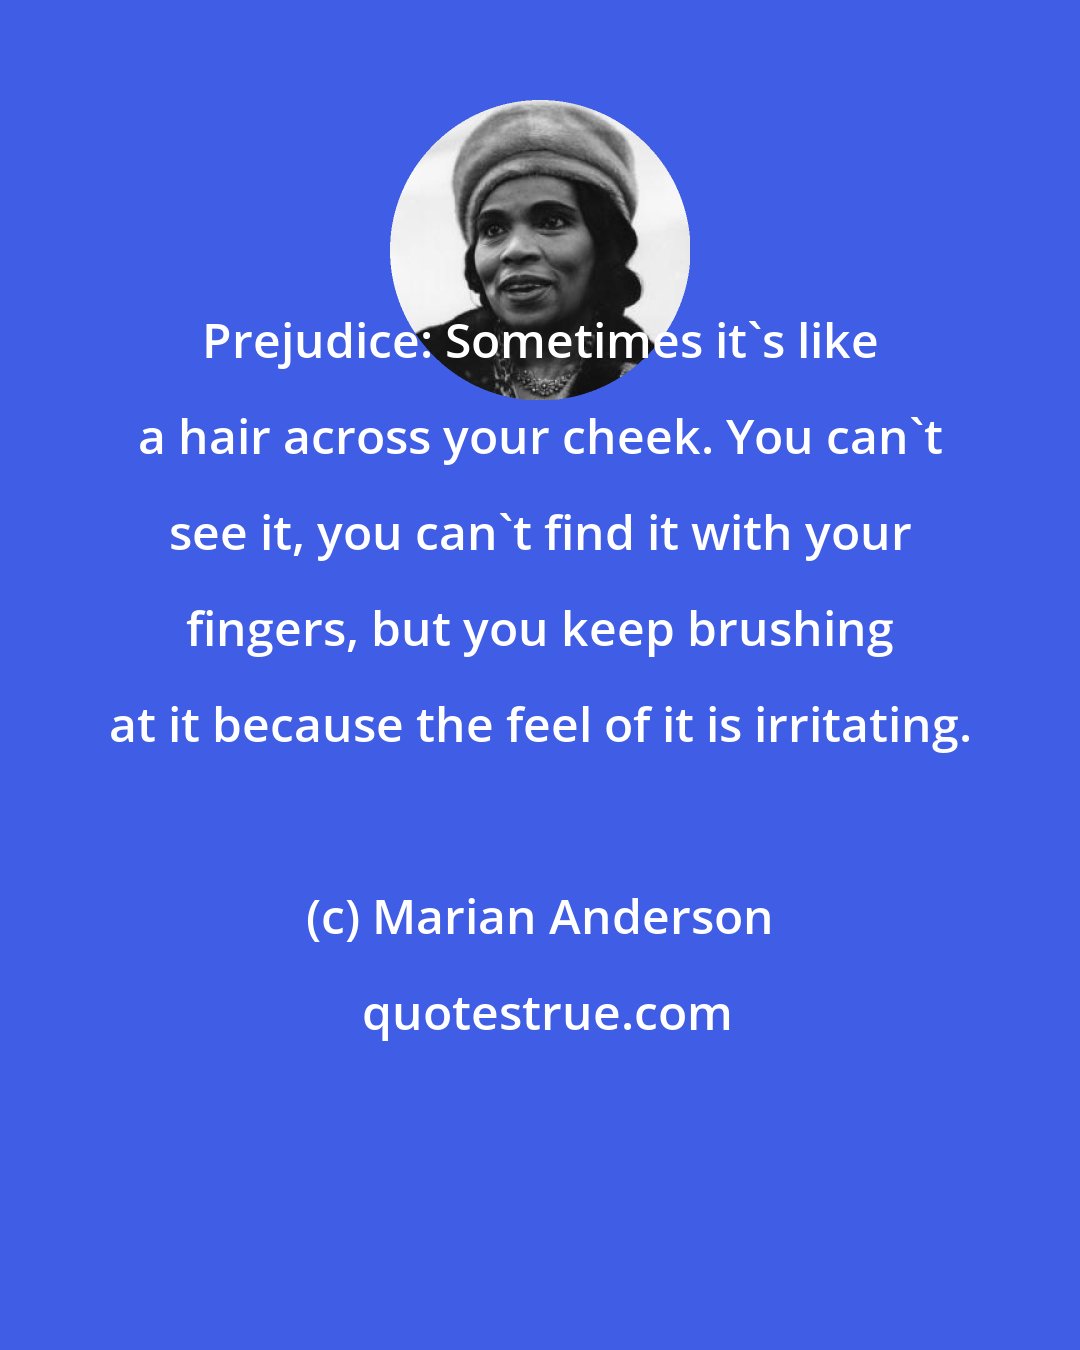 Marian Anderson: Prejudice: Sometimes it's like a hair across your cheek. You can't see it, you can't find it with your fingers, but you keep brushing at it because the feel of it is irritating.